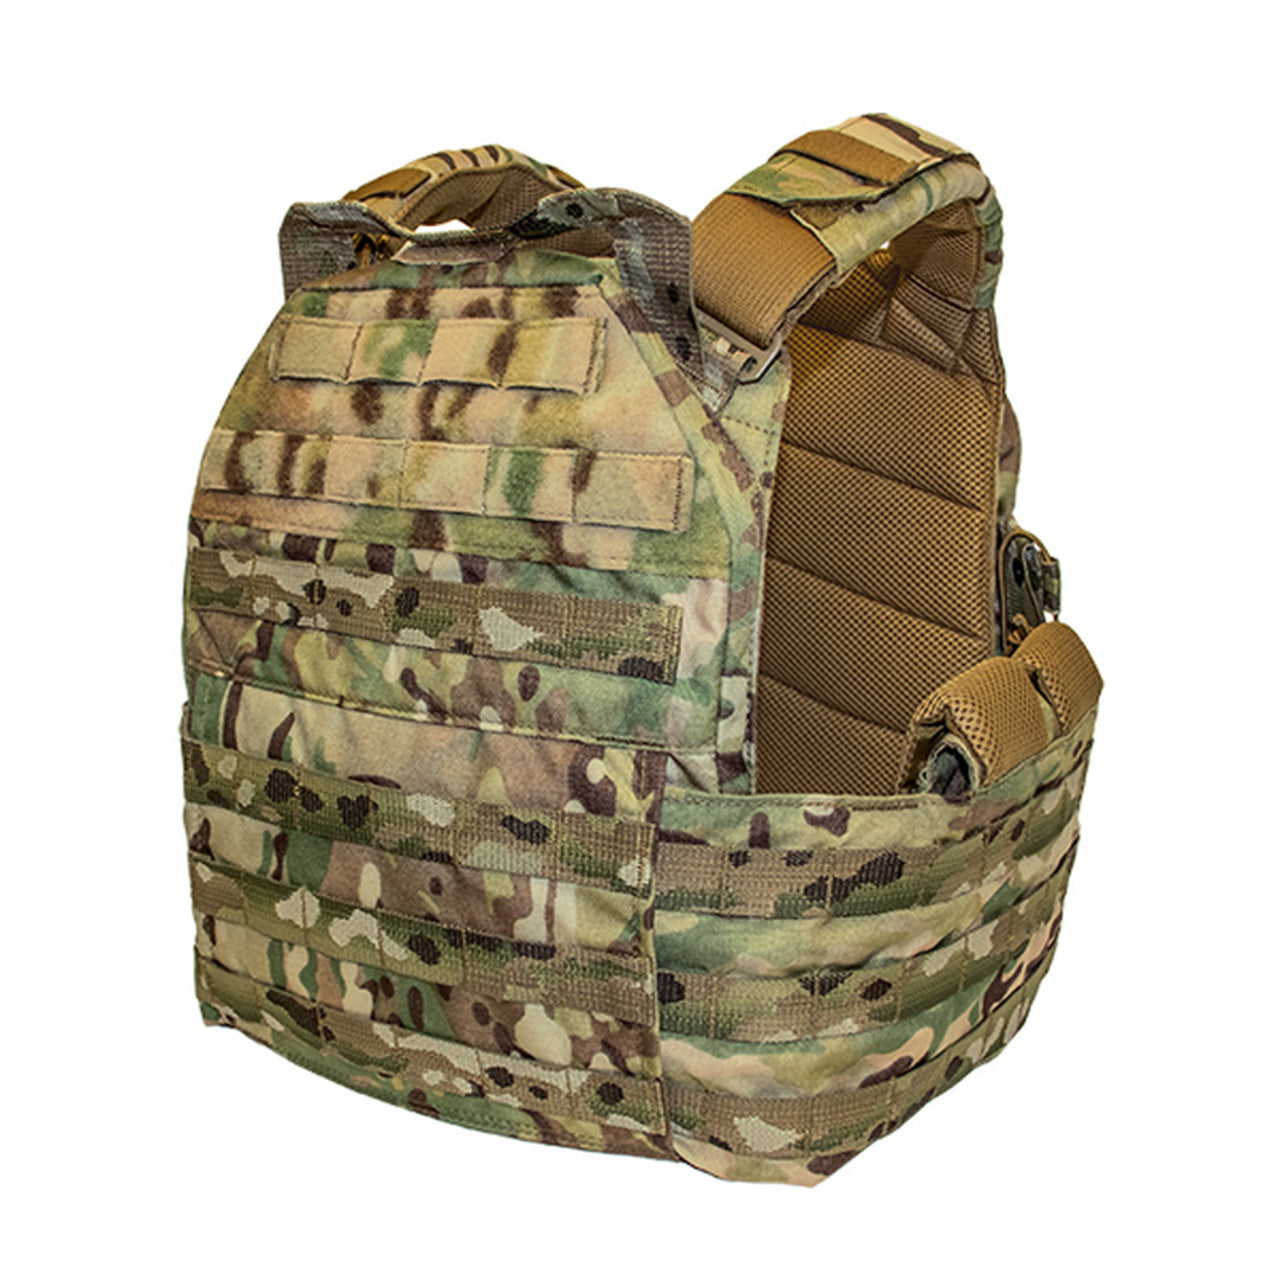 A modular and low profile multicam plate carrier, featuring the Shellback Tactical SF Plate Carrier by Shellback Tactical, on a white background.